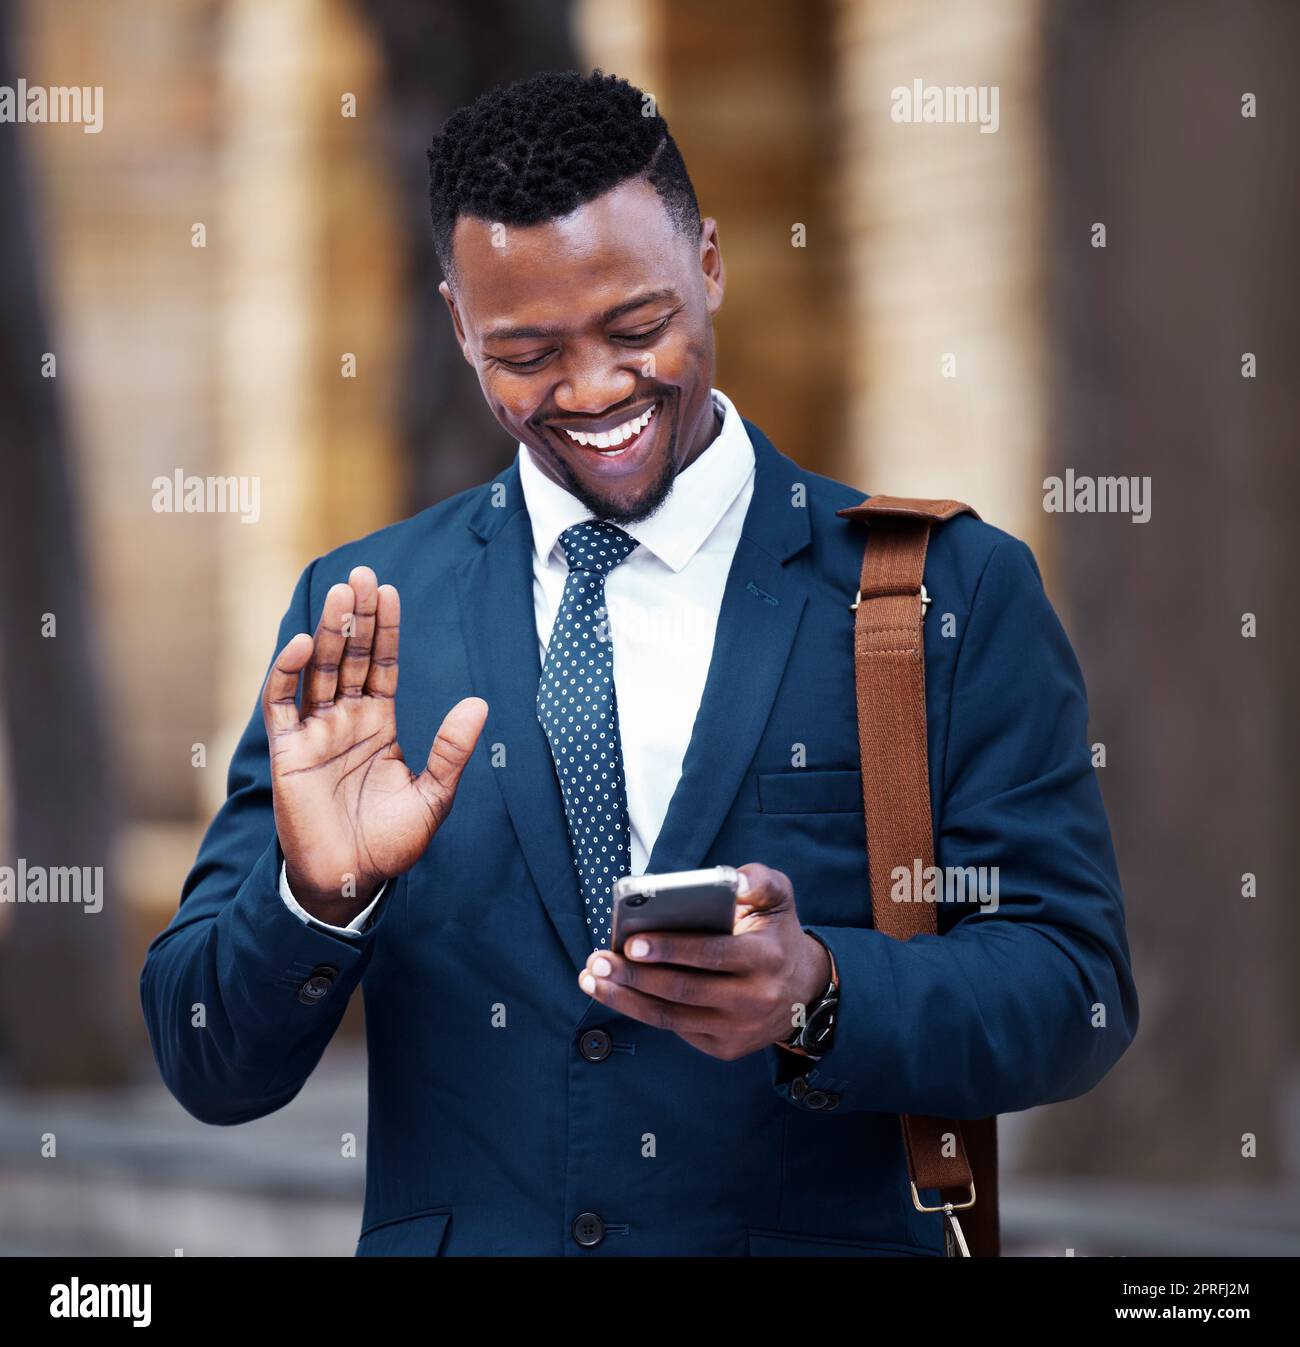 Young African businessman video call on smartphone, outside company office building and communication in city. Portrait of entrepreneur on social media, 5g internet connection with mobile technology. Stock Photo